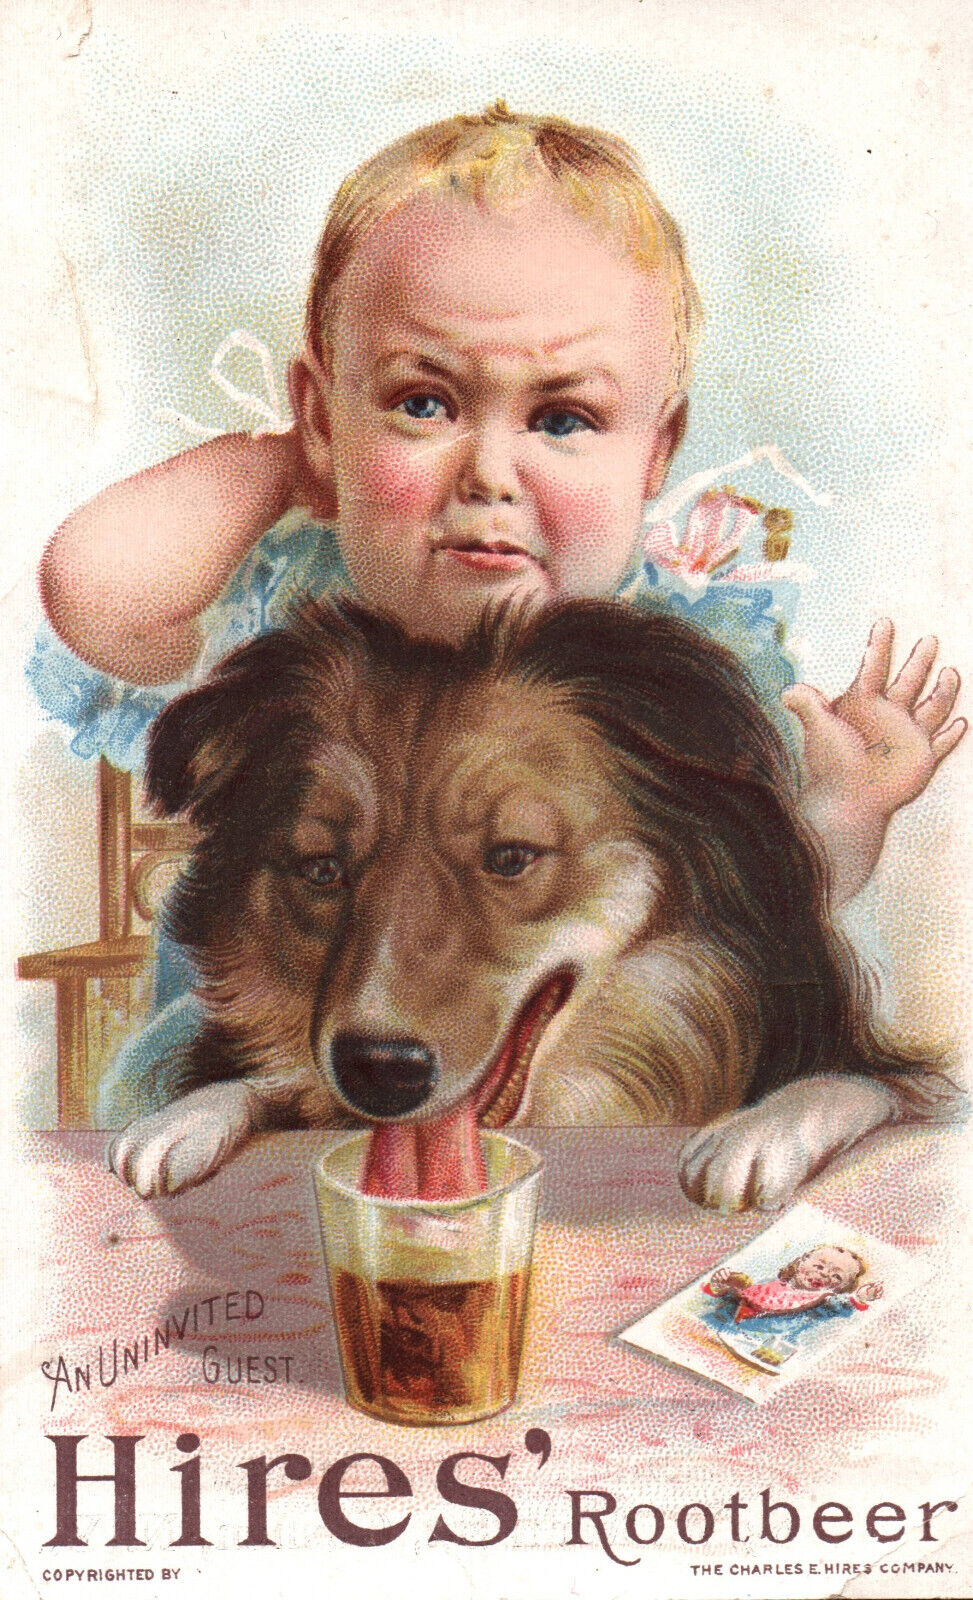 CIRCA 1880S - 1890S HIRES ROOTBEER ADVERTISING TRADE CARD- Collie Dog